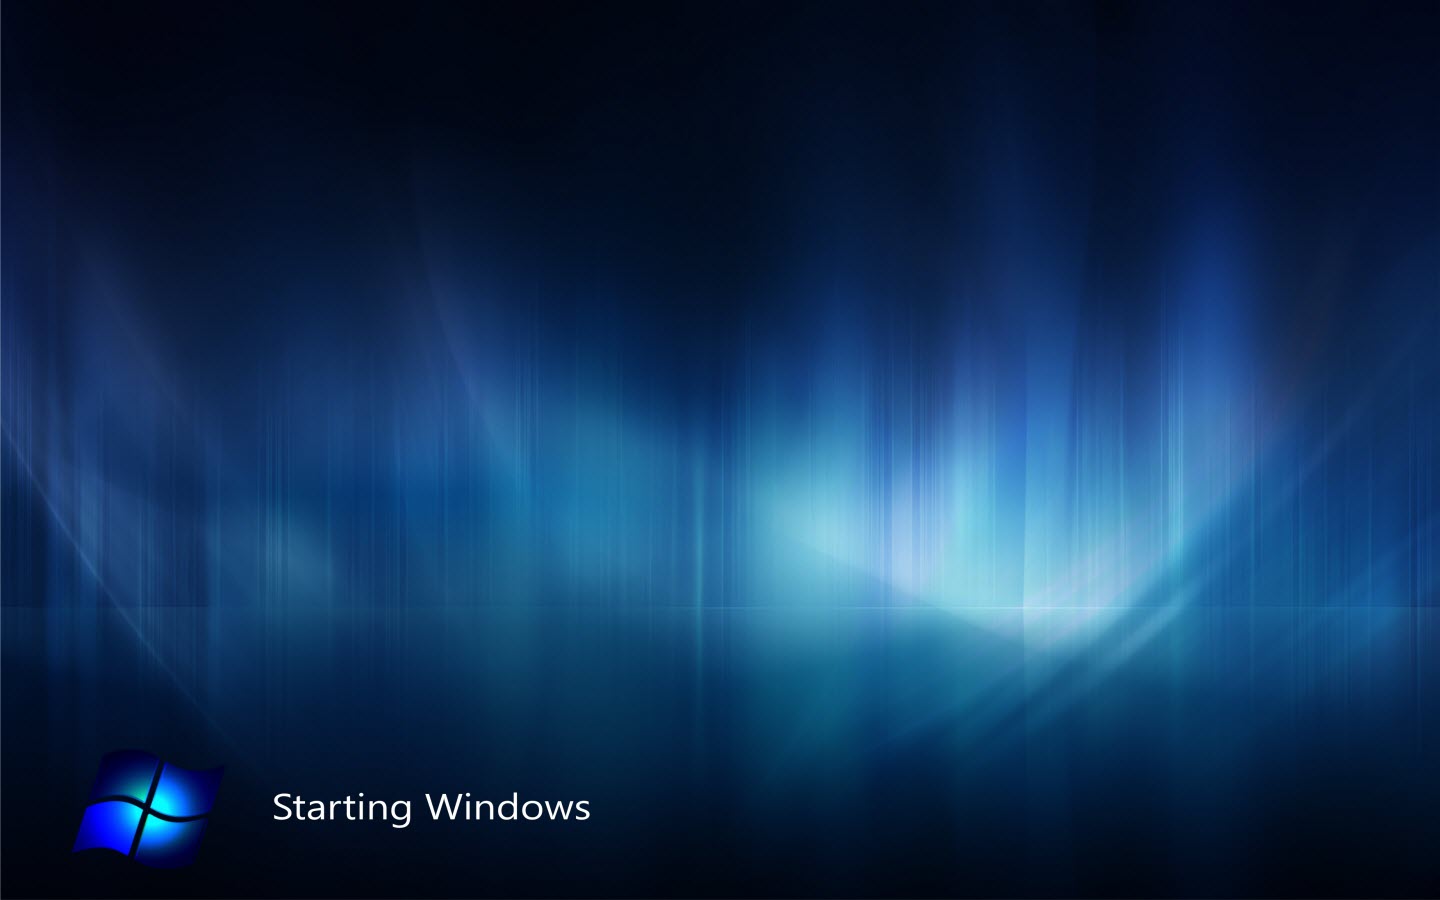 The first 6 wallpapers are Windows 8 Wallpapers Enjoy